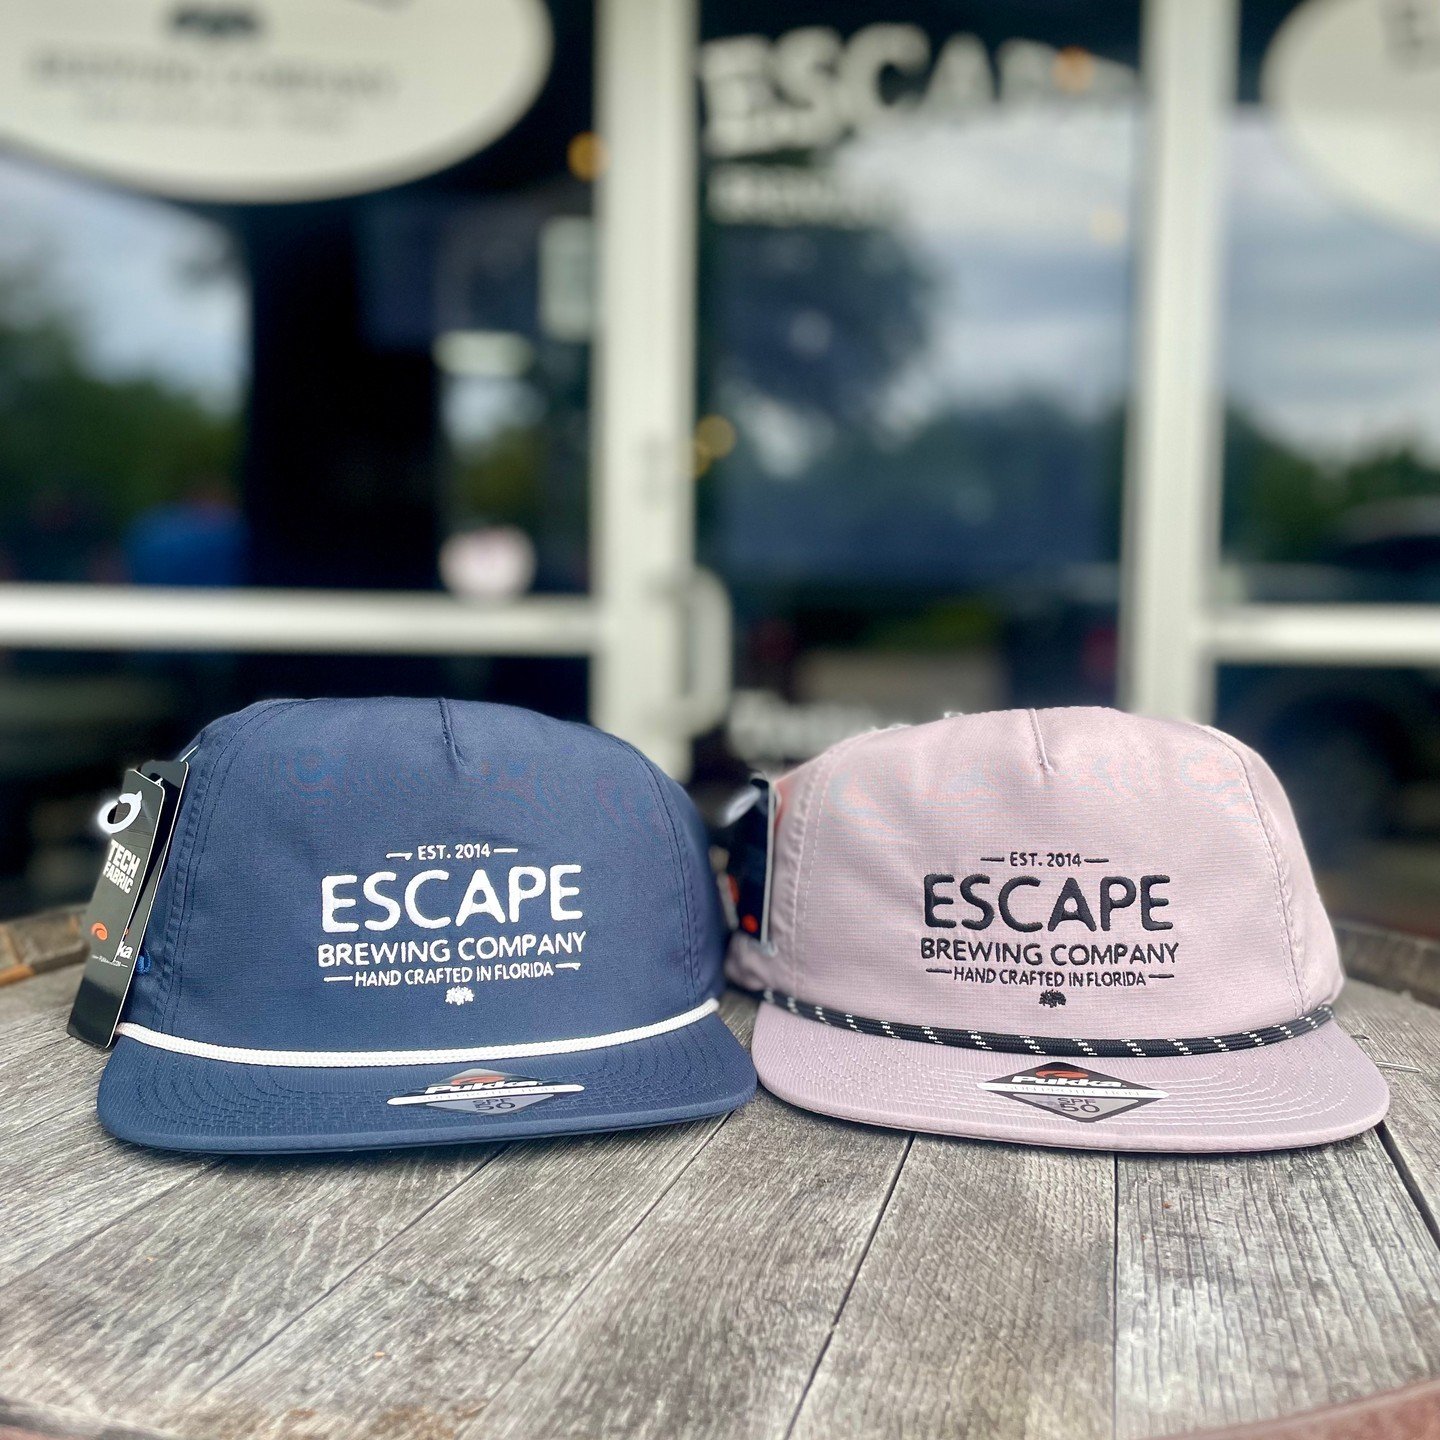 NEW HATS ARE HERE!

New hats are here just in time for summer! Perfect for the beach, golf course, or every day ☀️

Available in the taproom and on our website, www.escapebrewingcompany.com

____________
T O D A Y
4PM-10PM

#drinkenjoyescape #escapeb